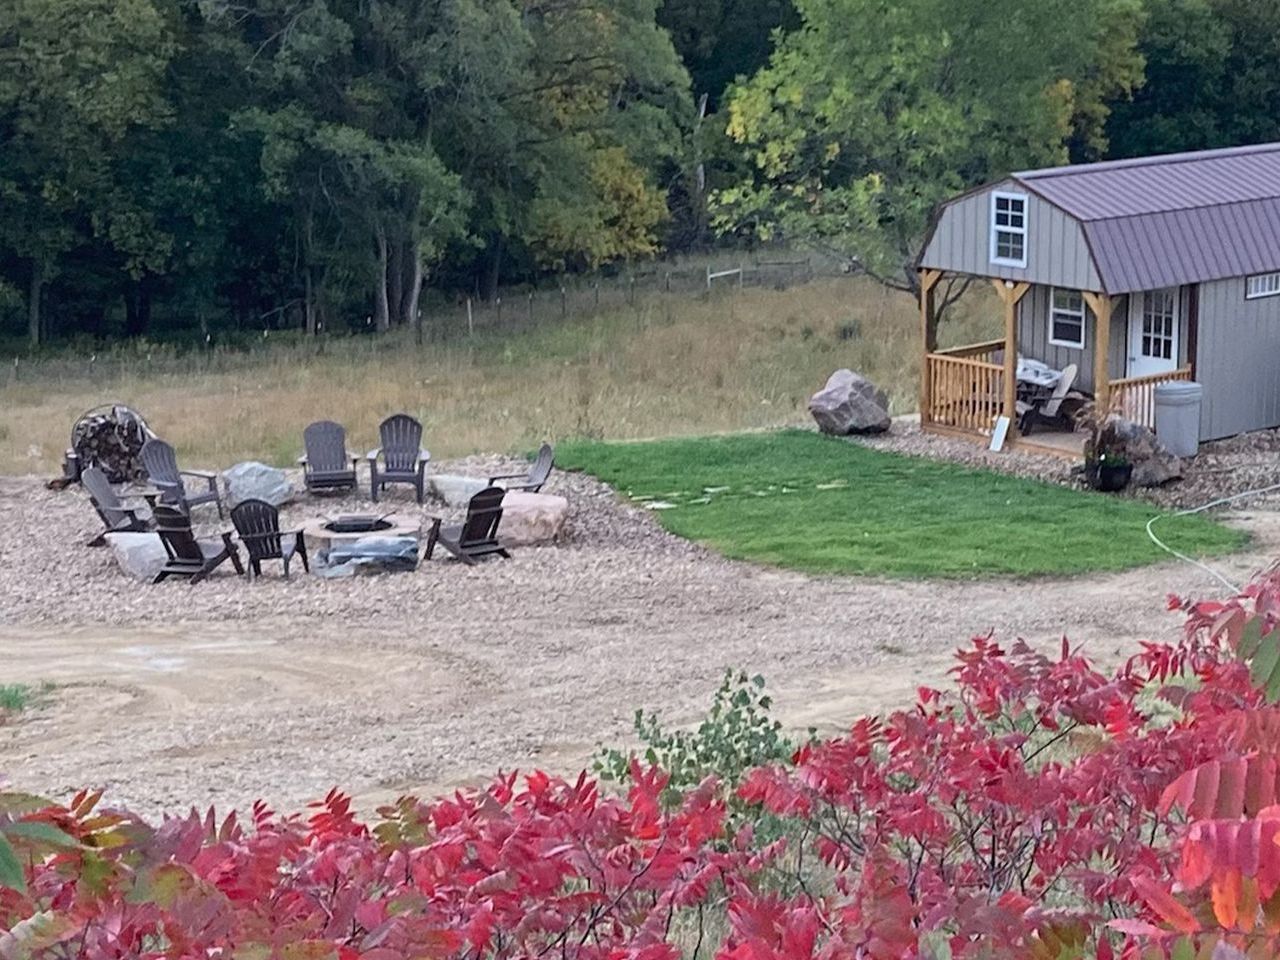 There is a fire pit in the middle of a field next to a barn.